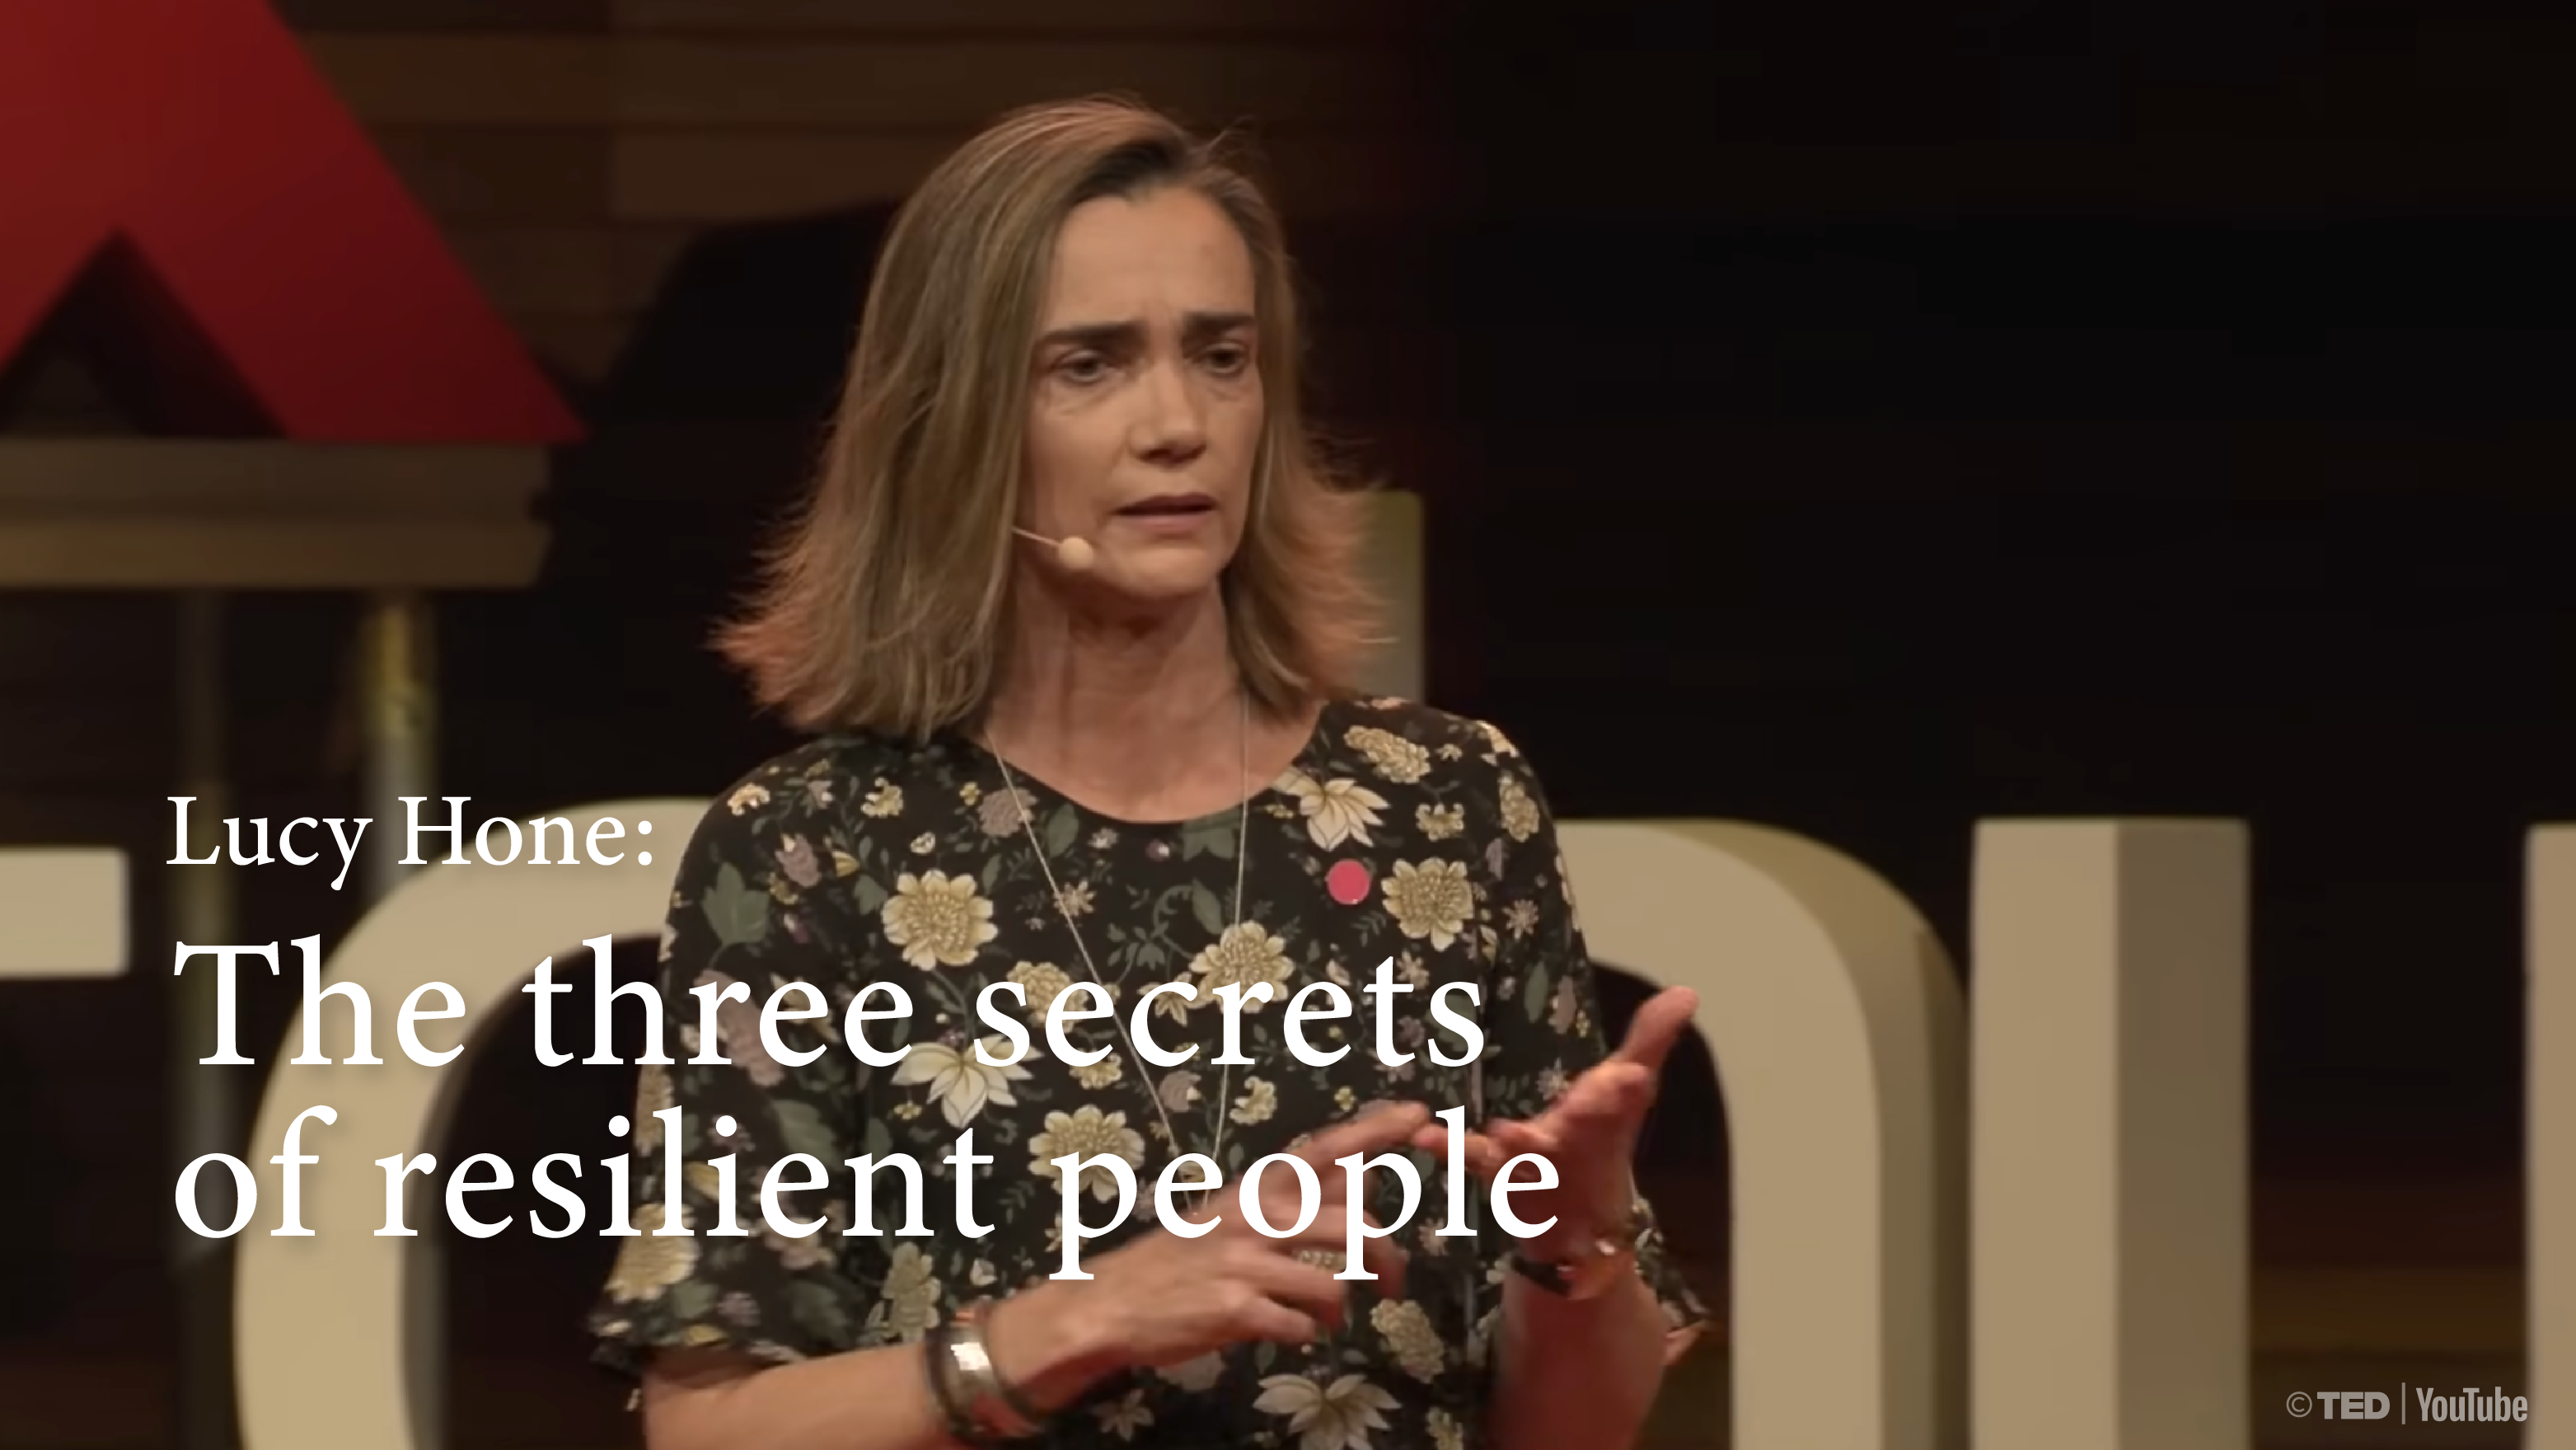 [B] The three secrets of resilient people | Lucy Hone [FULL]